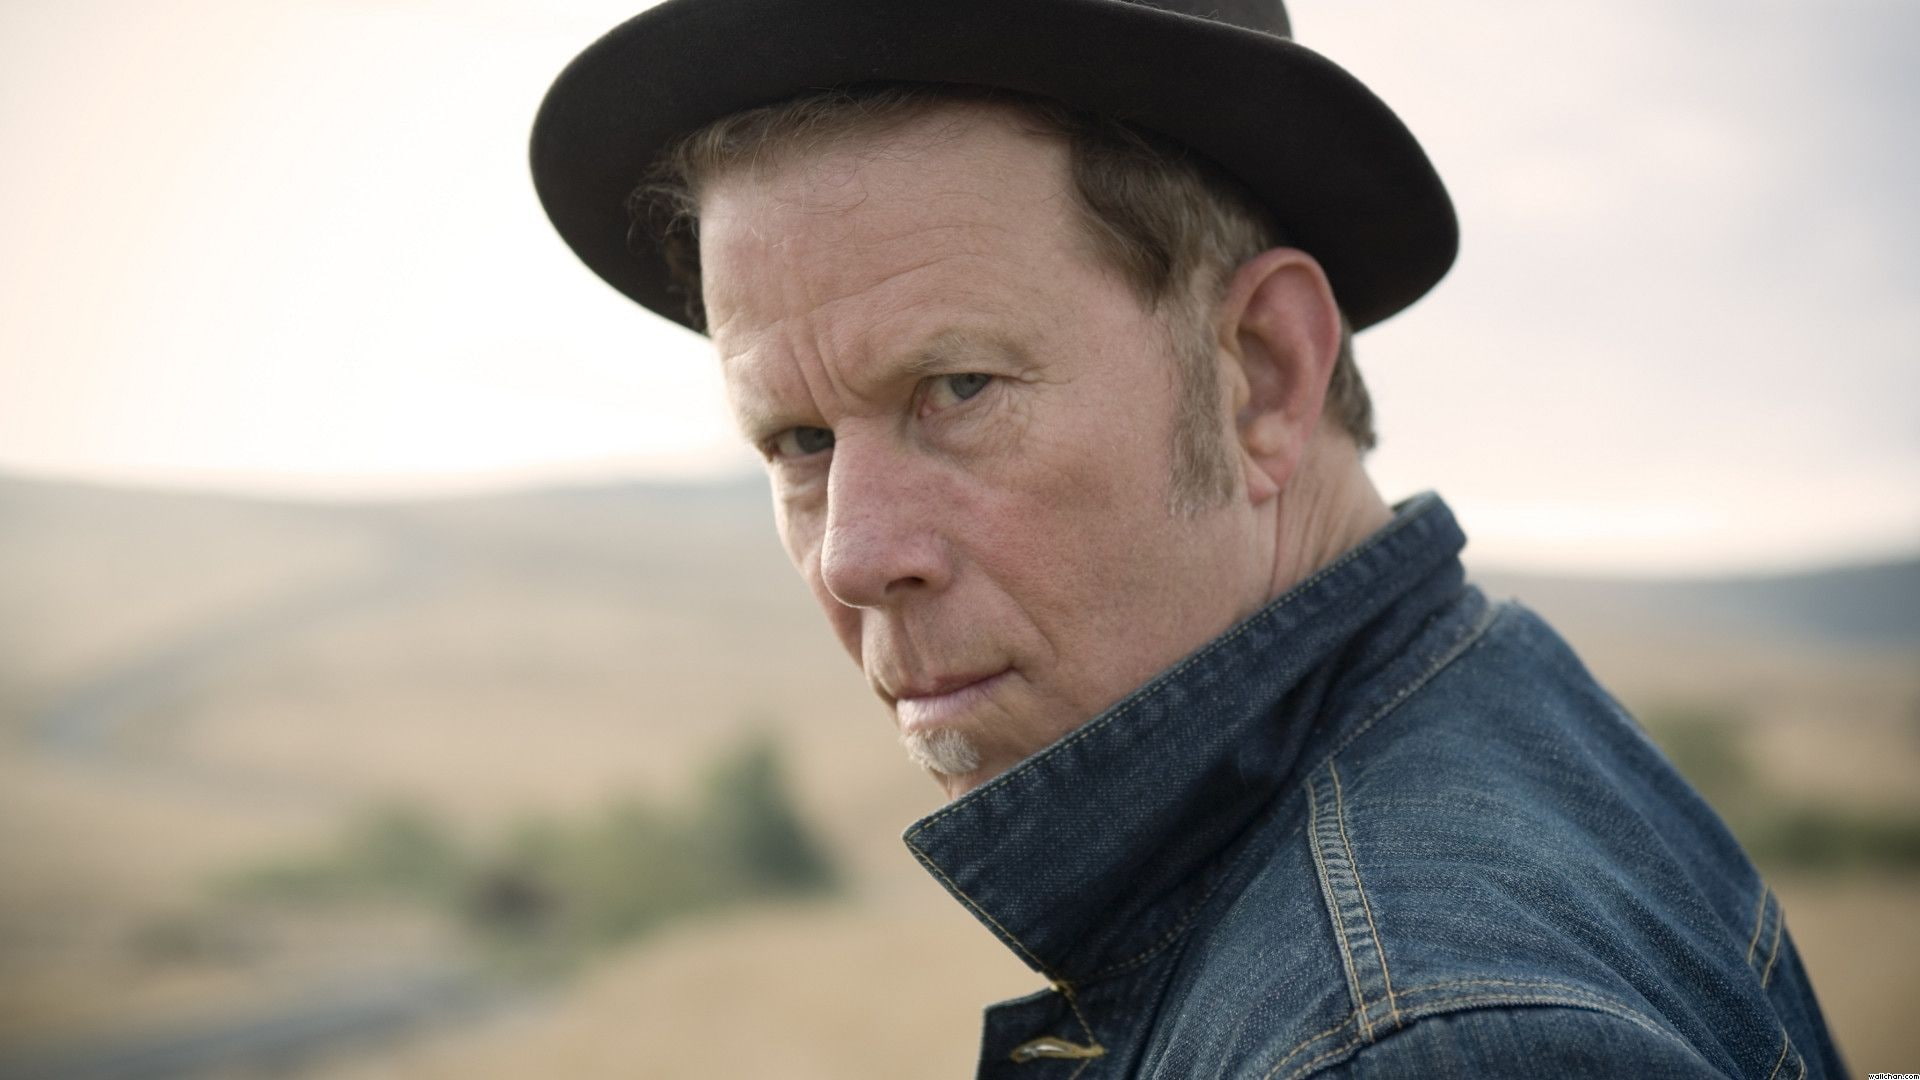 tom waits musicians songwriters actor singer, one person, portrait